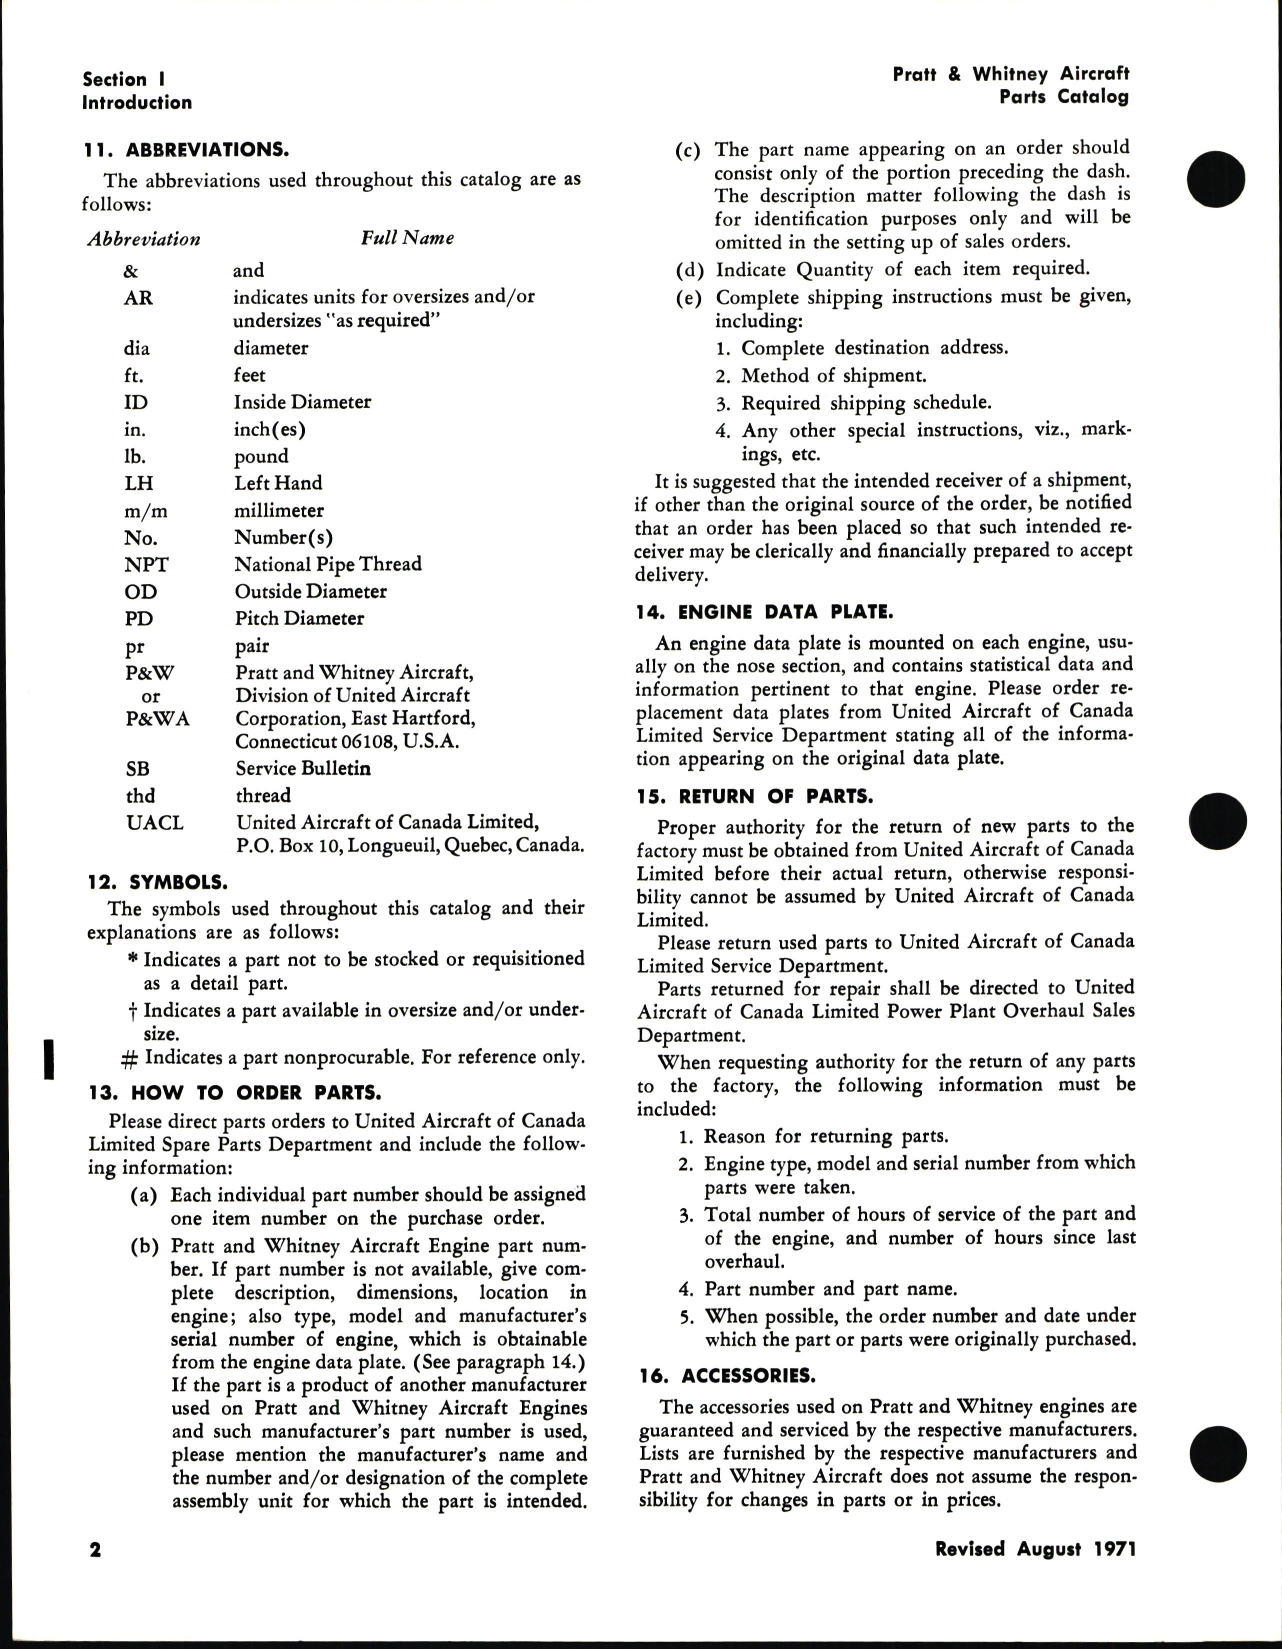 Sample page 8 from AirCorps Library document: Illustrated Parts Catalog for Wasp Jr Engines